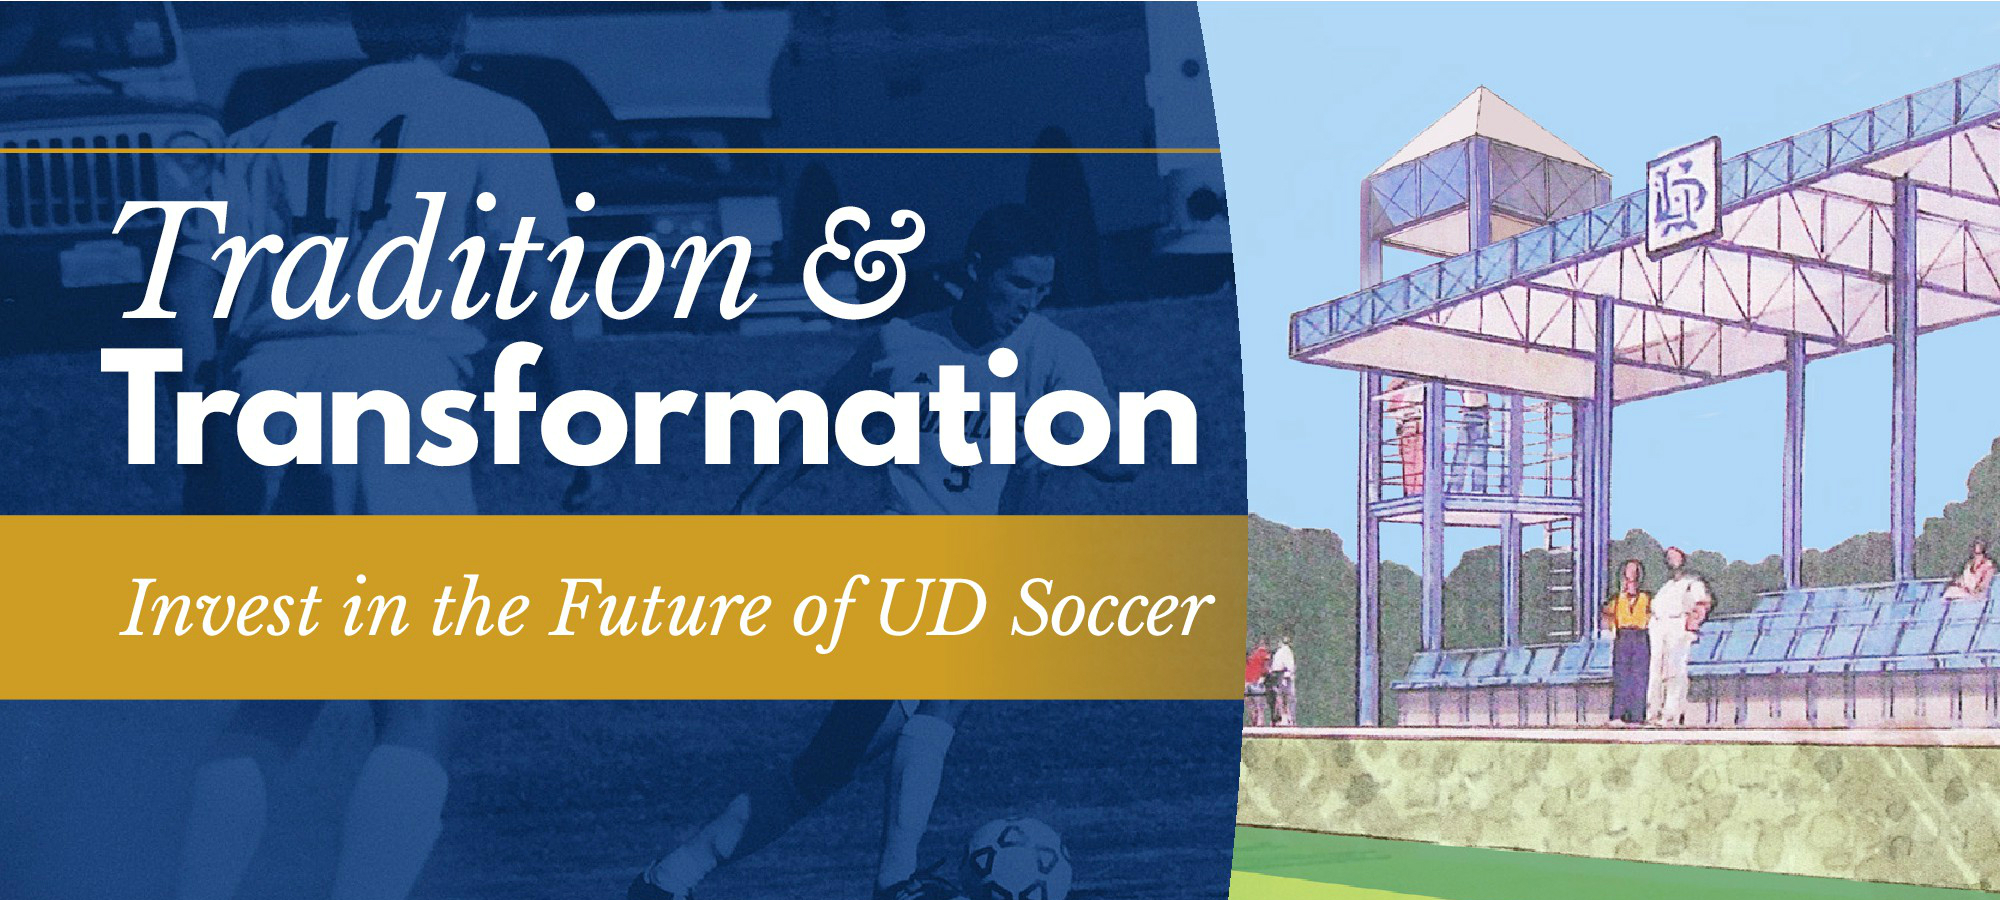 Learn how You can #InvestinUDSoccer